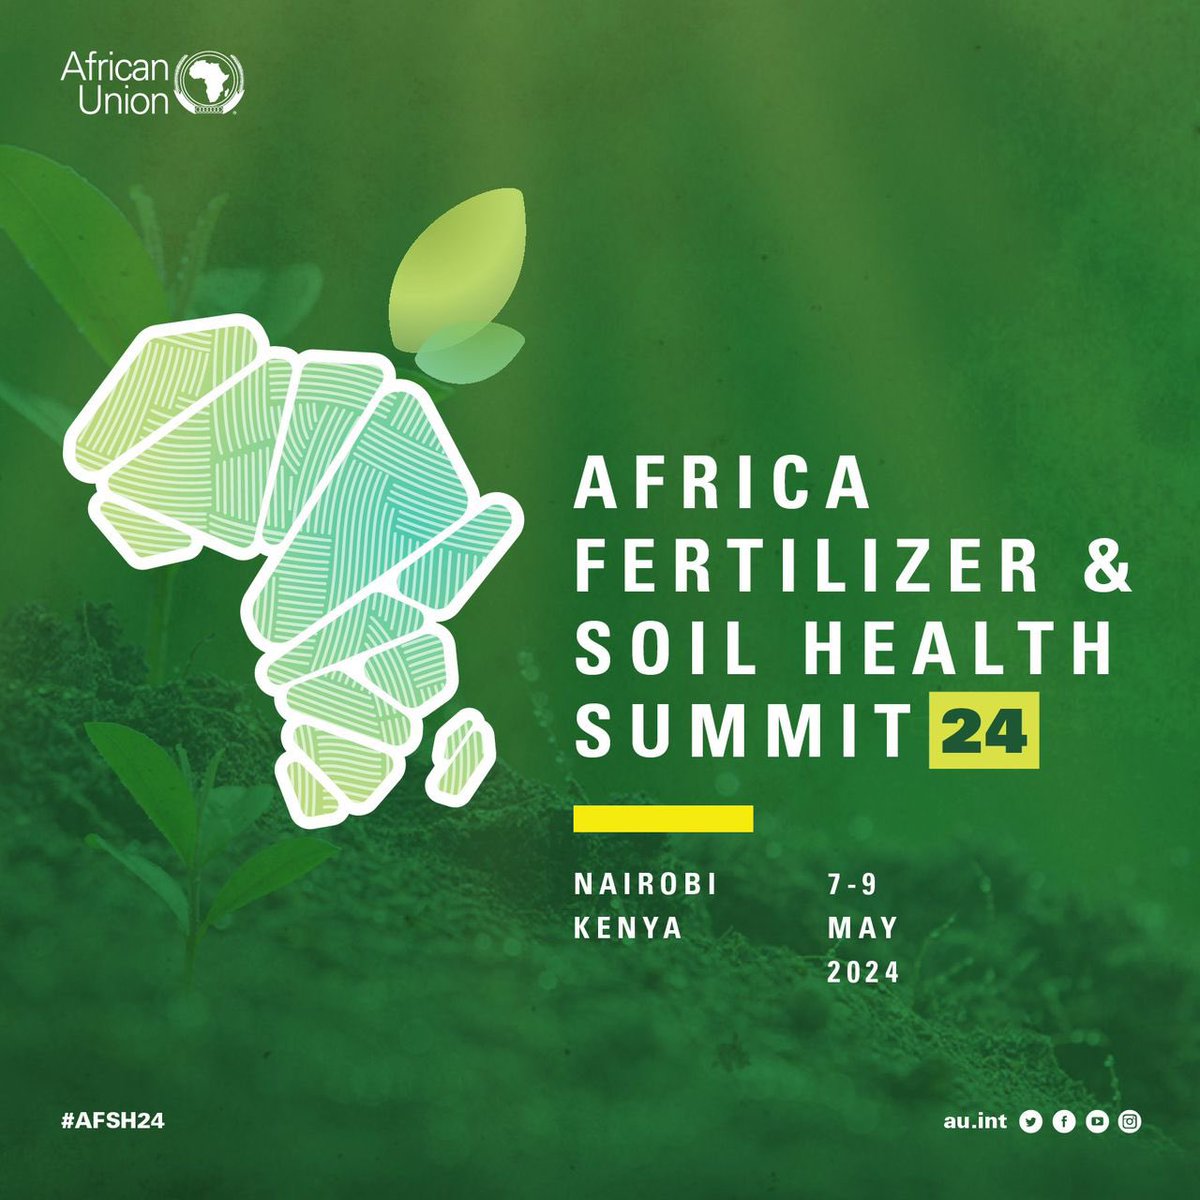 Nairobi will be hosting the Africa Fertiliser and Soil Health Summit on 7-9 May.

The summit will be convened at the level of heads of state and government, and it will also include active engagement from other stakeholders.